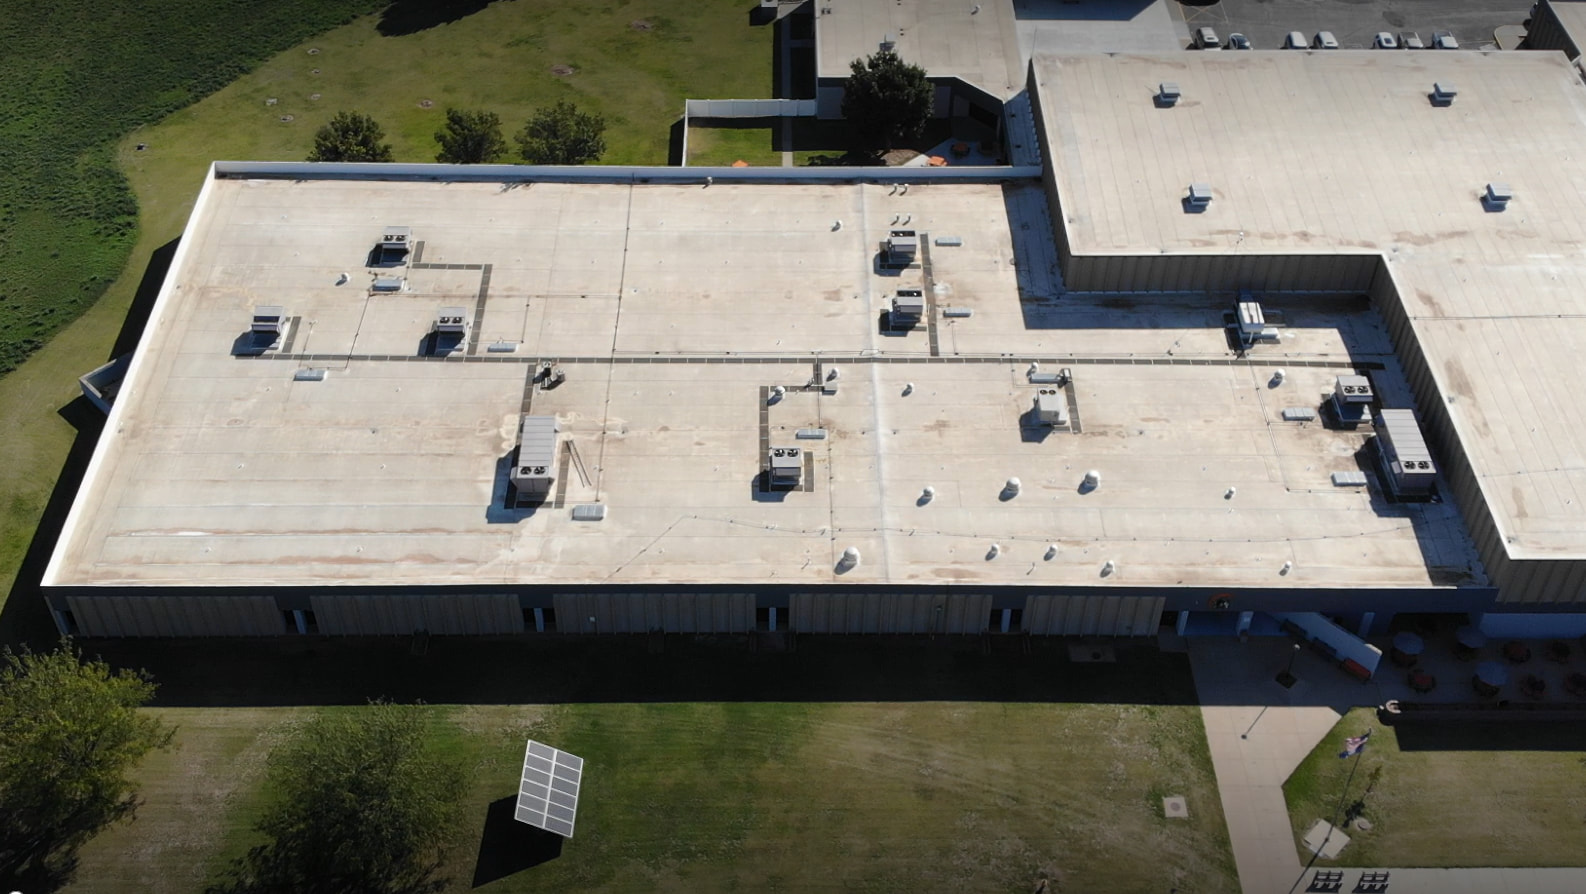 Rooftop view of high school with rooftop HVAC units